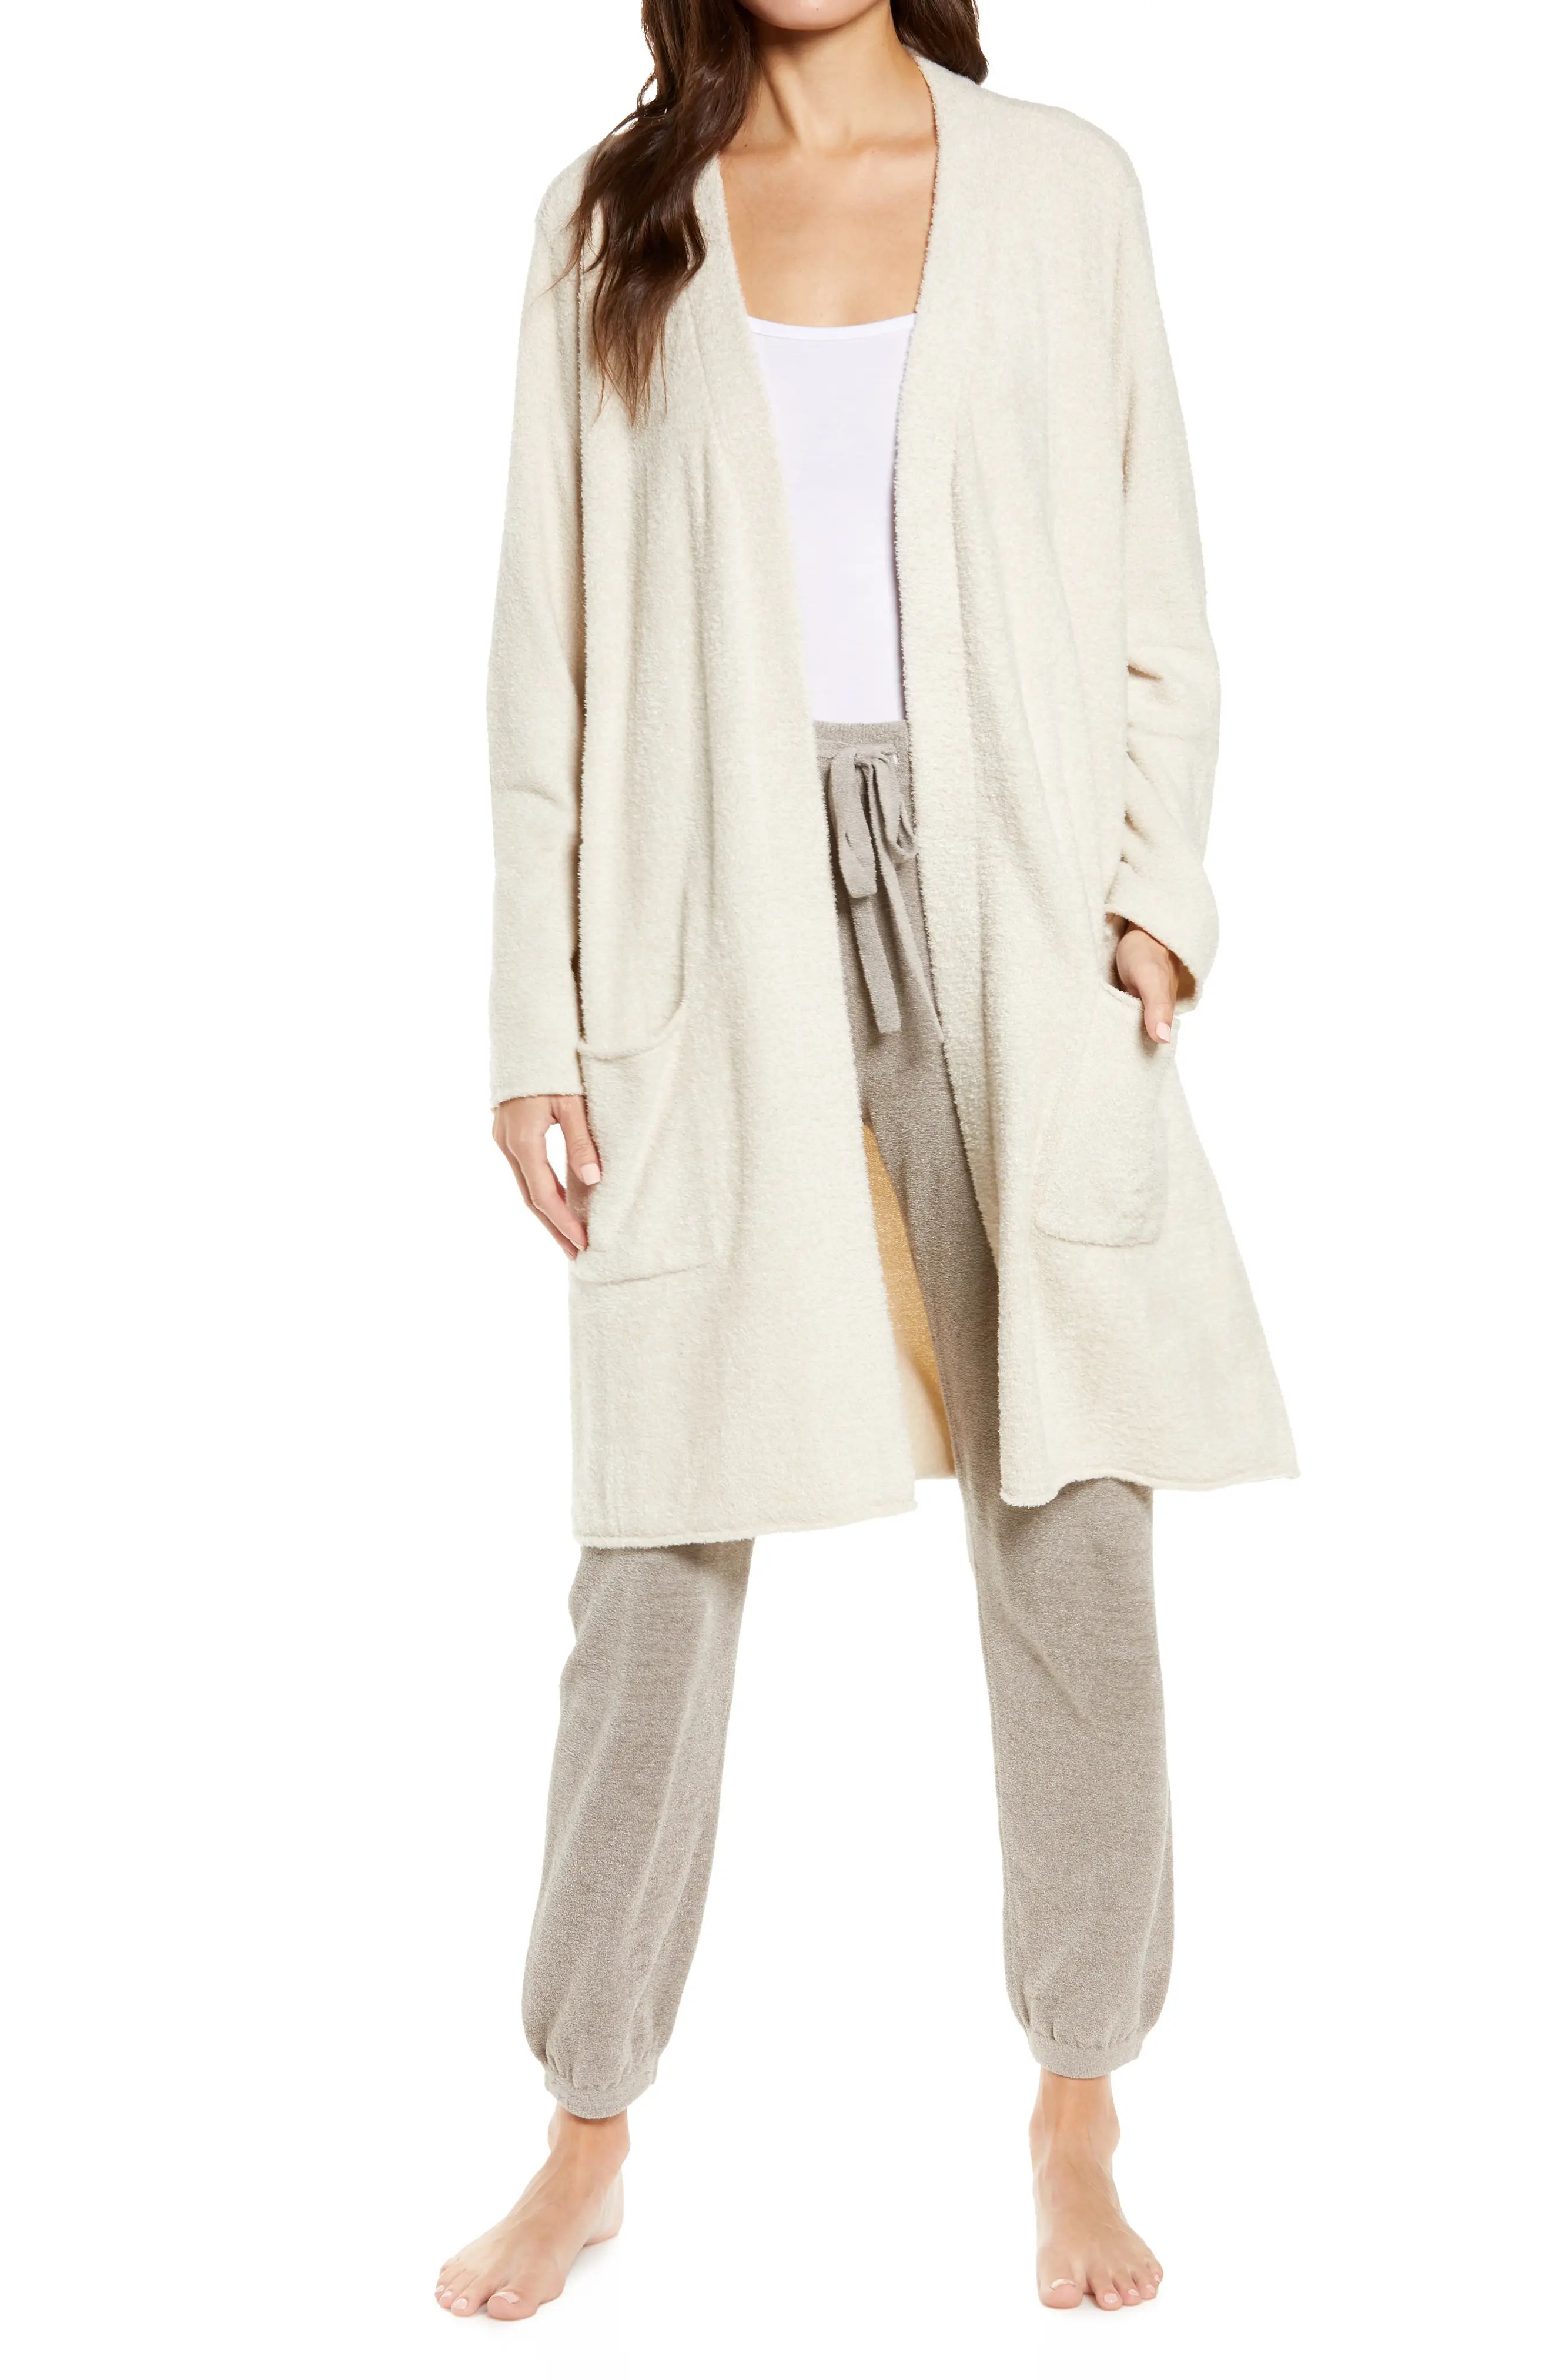 Barefoot Dreams(R) CozyChic(TM) Lite Long Cardigan, Size 3X in Bisque at Nordstrom | Nordstrom